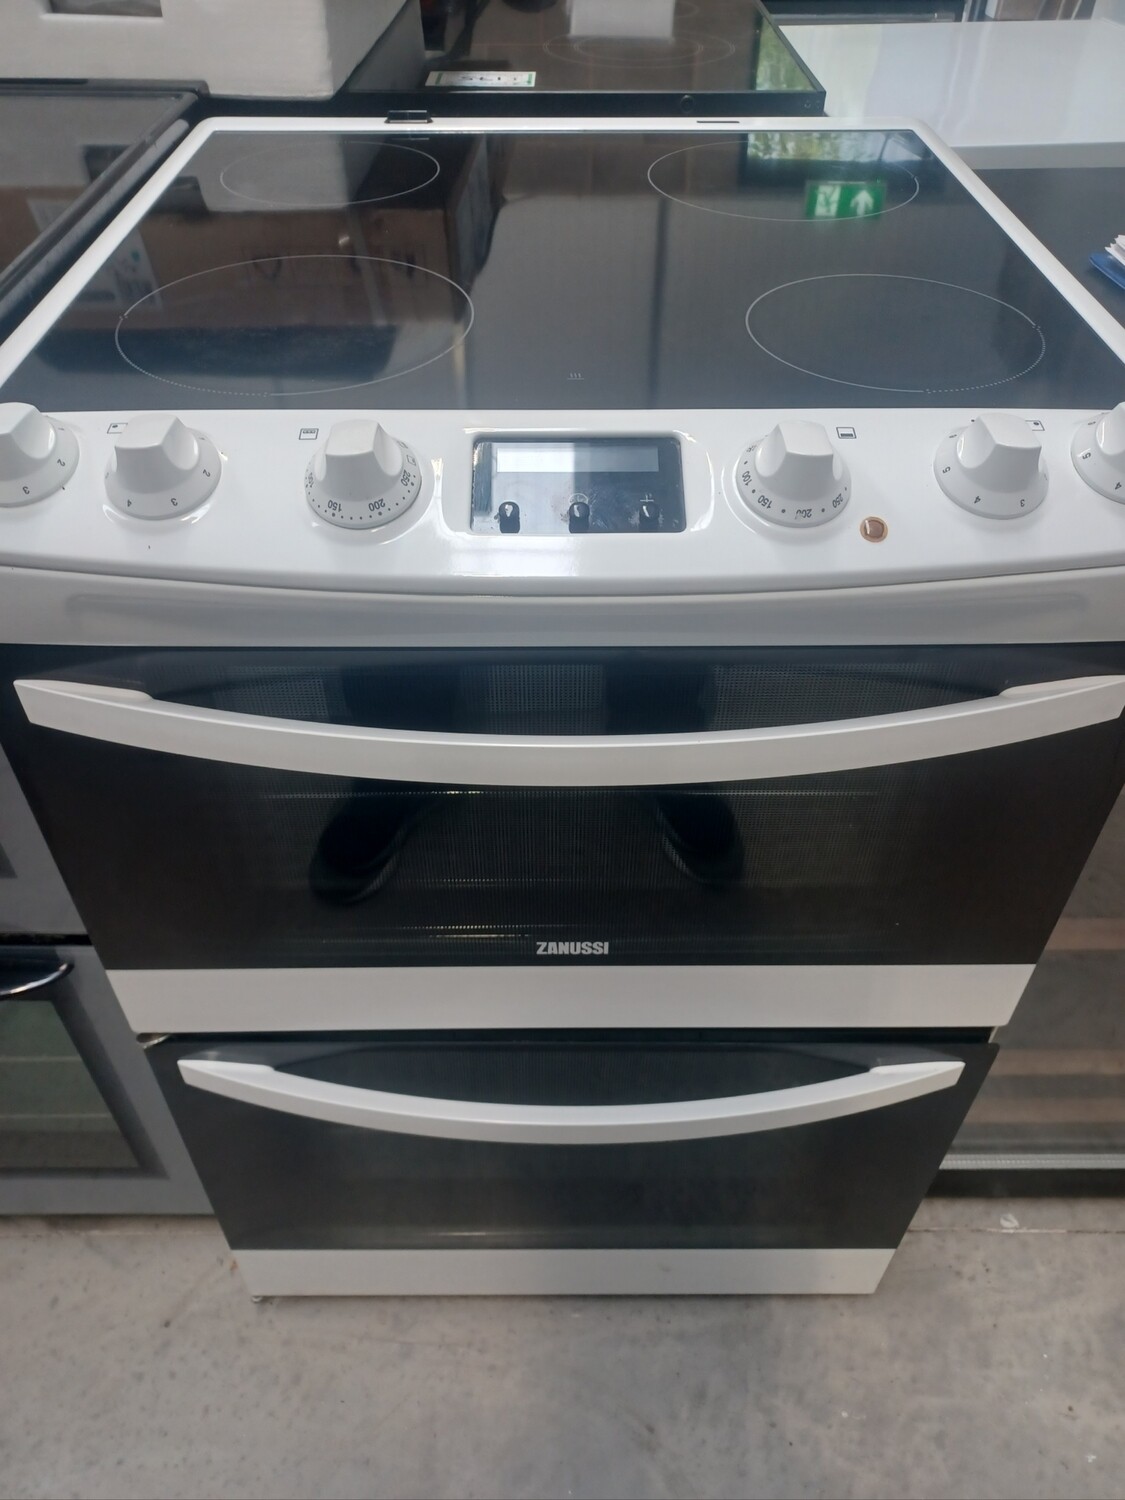 Zanussi 60cm Double Oven Cooker Ceramic Hobs - White - Refurbished + 6 Month Guarantee 